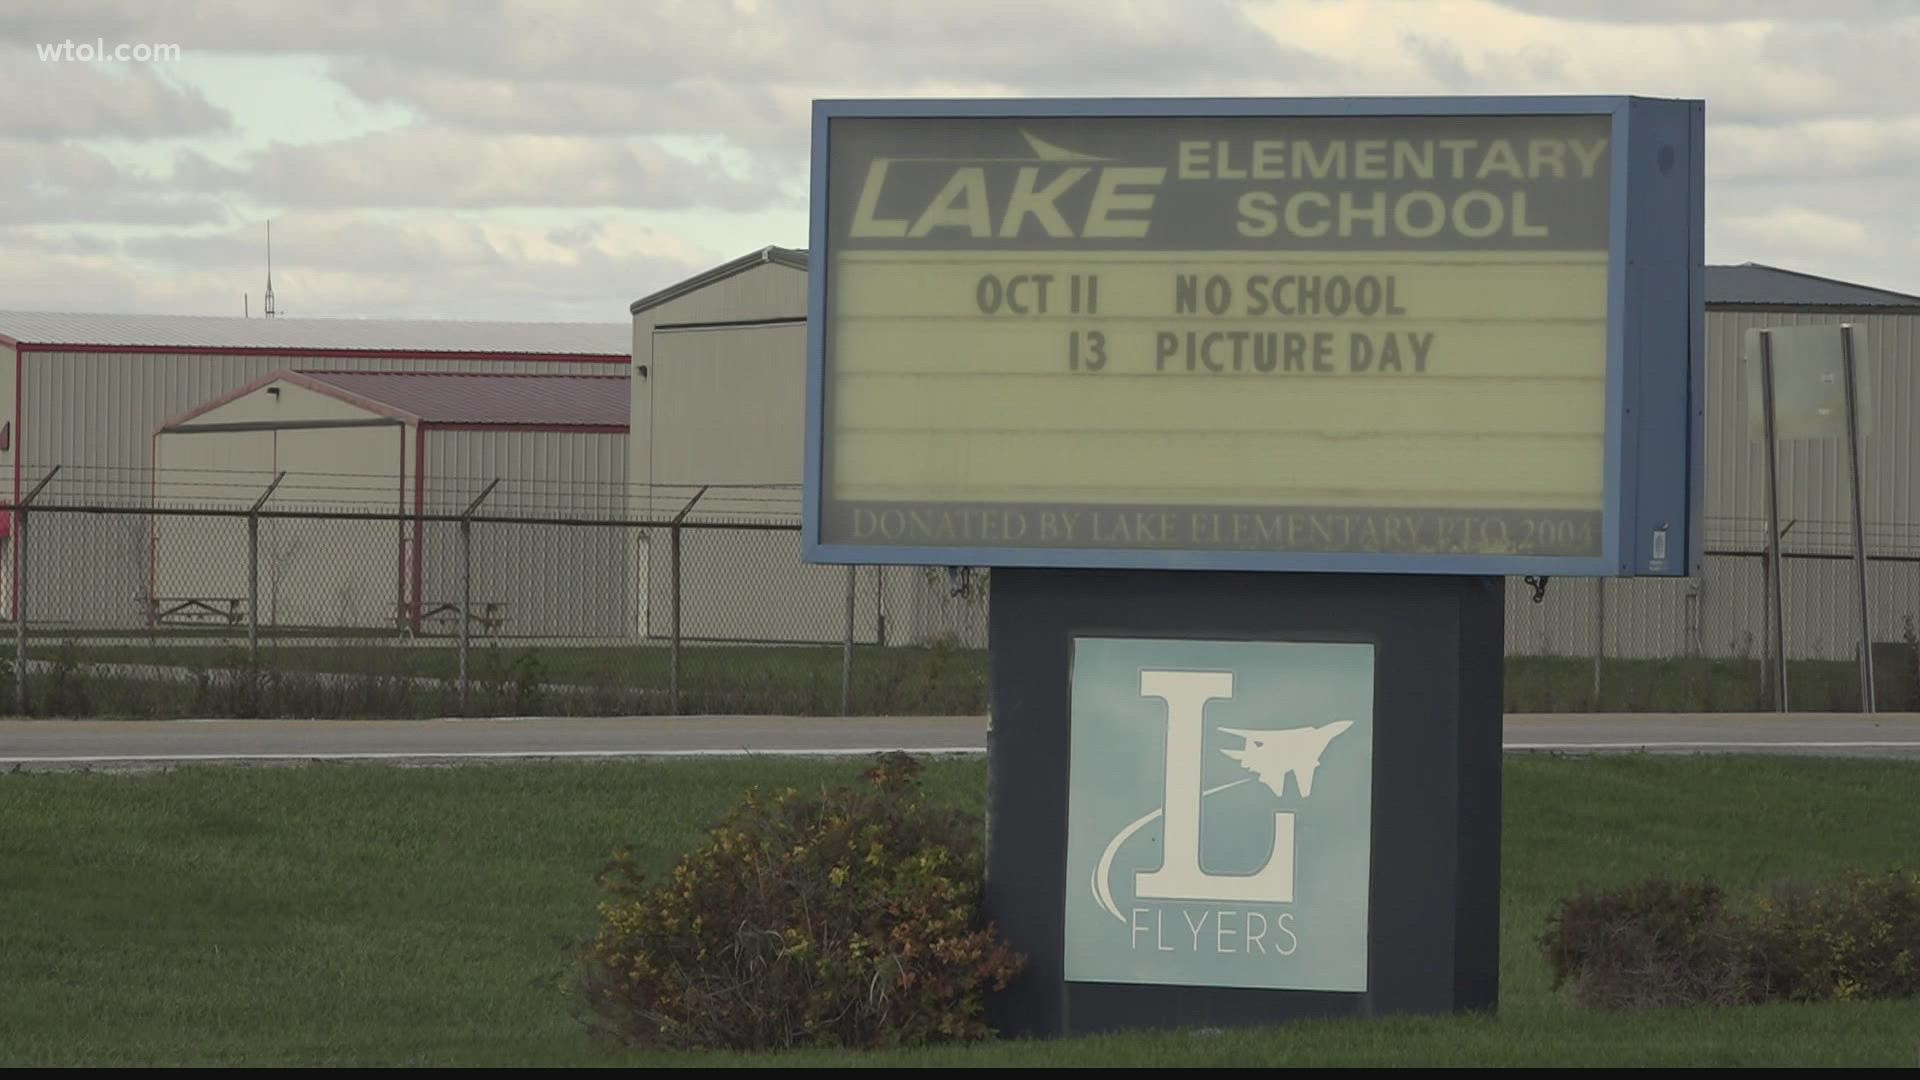 If approved, Lake's superintendent says the district would save $19 million building the school now as opposed to waiting.